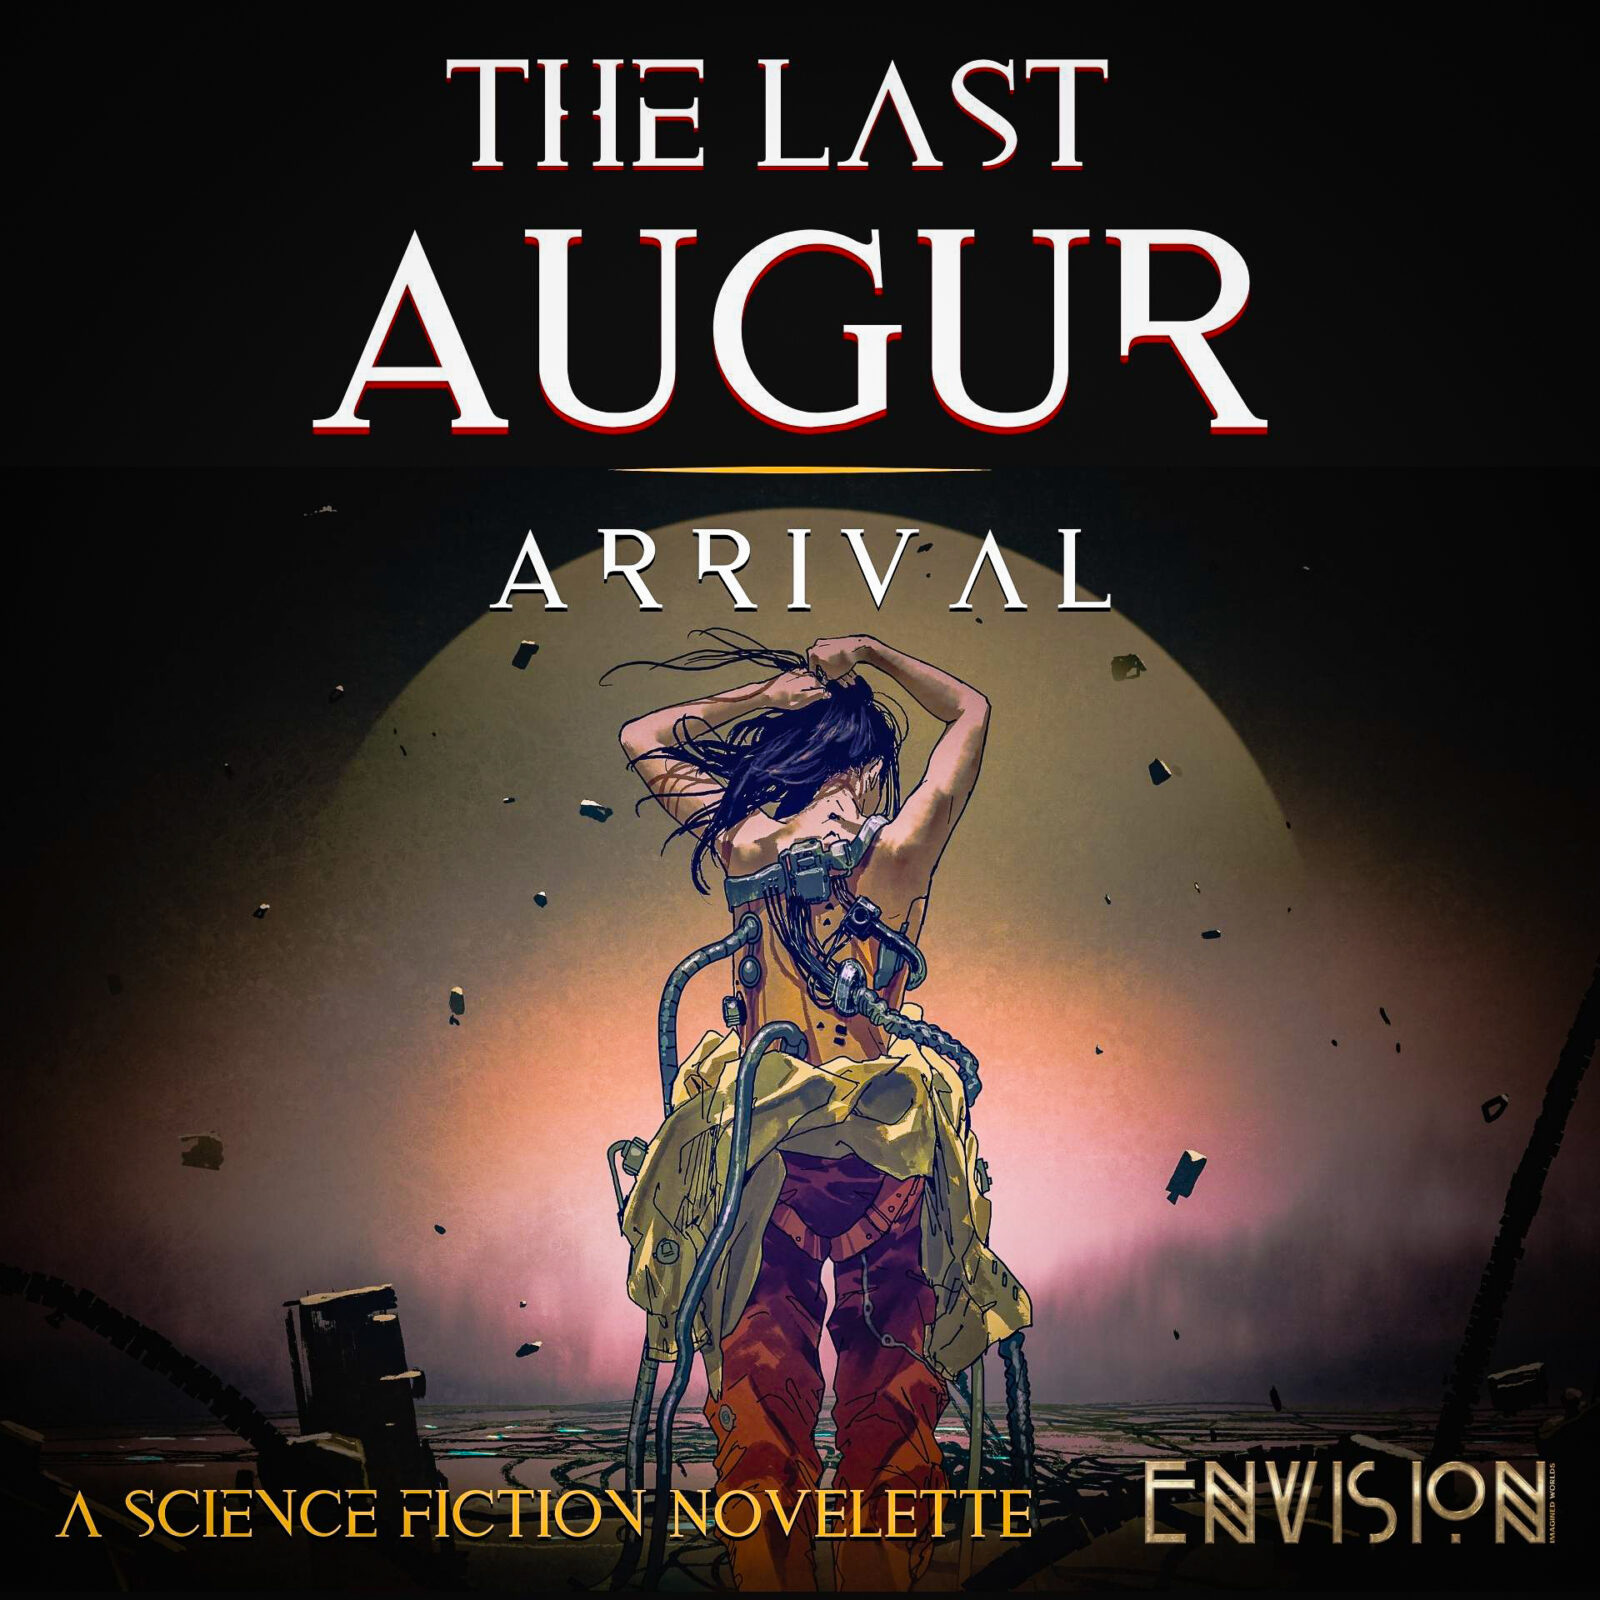 The Last Augur - ARRIVAL by Dennis Lowery